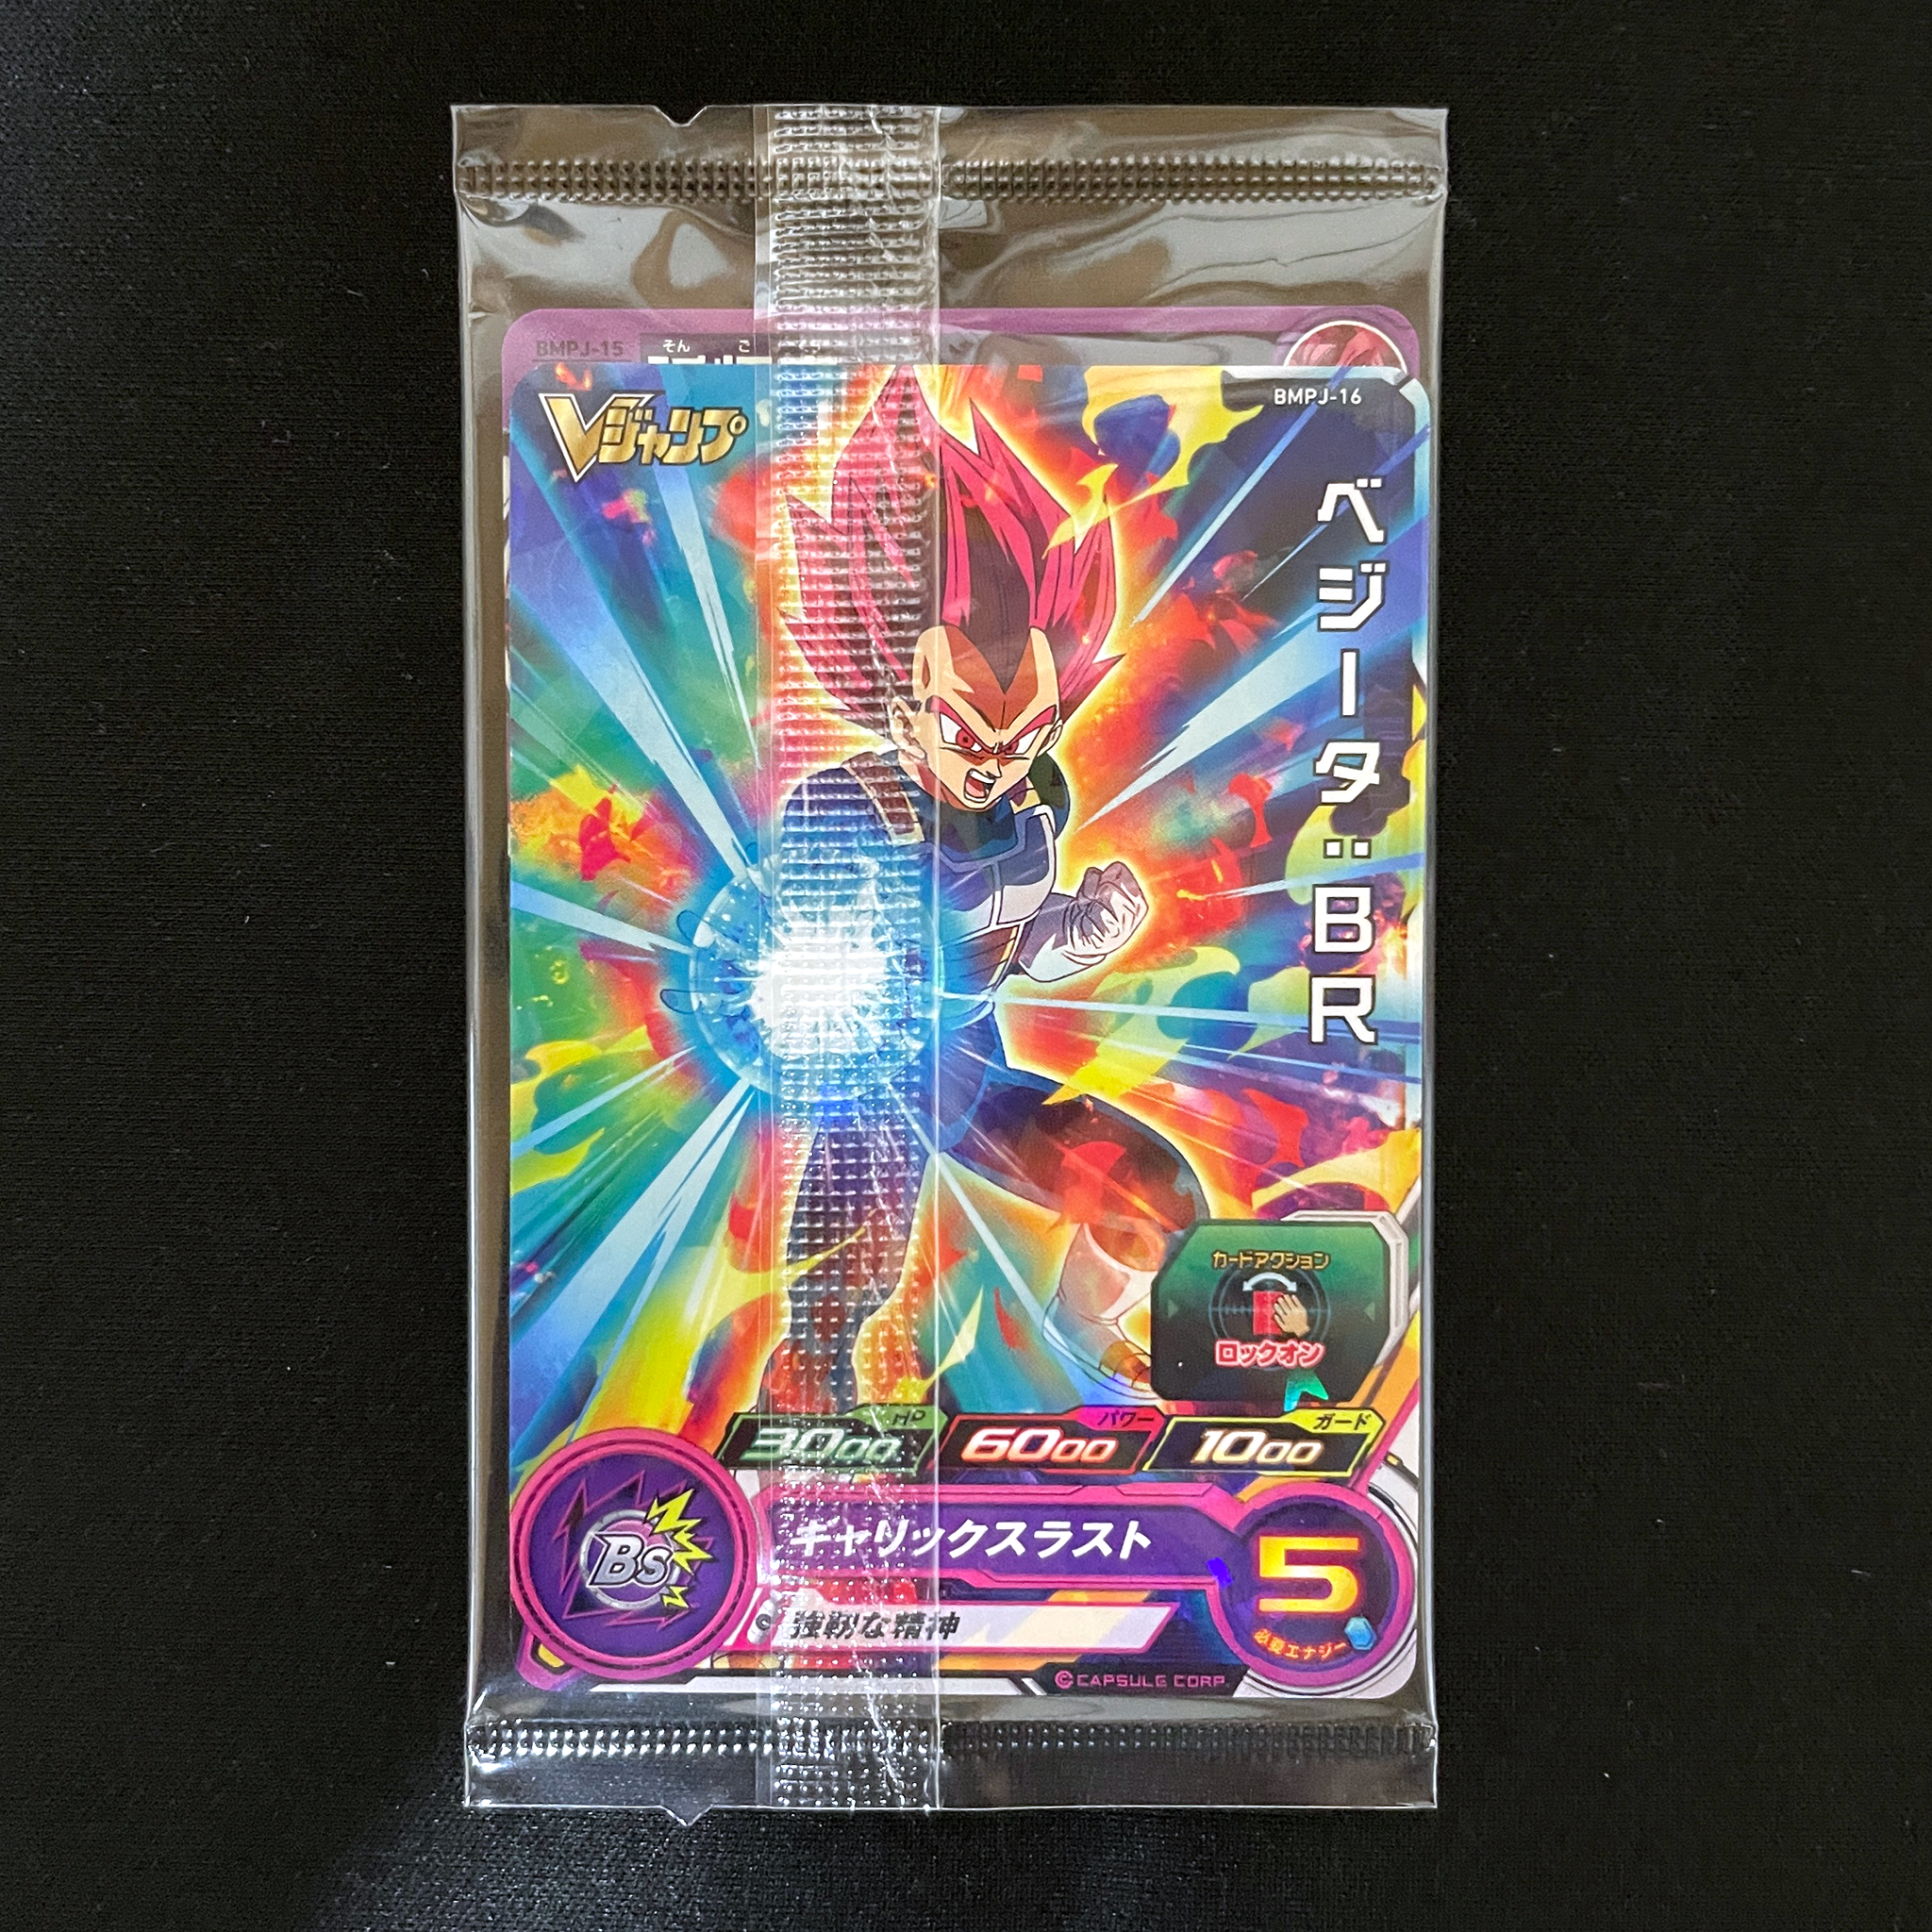 SUPER DRAGON BALL HEROES BMPJ-15 & BMPJ-16 in blister  Promotional cards given to annual subscribers of V JUMP magazine. November 2020  BMPJ-15 Son Goku & BMPJ-16 Vegeta : BR